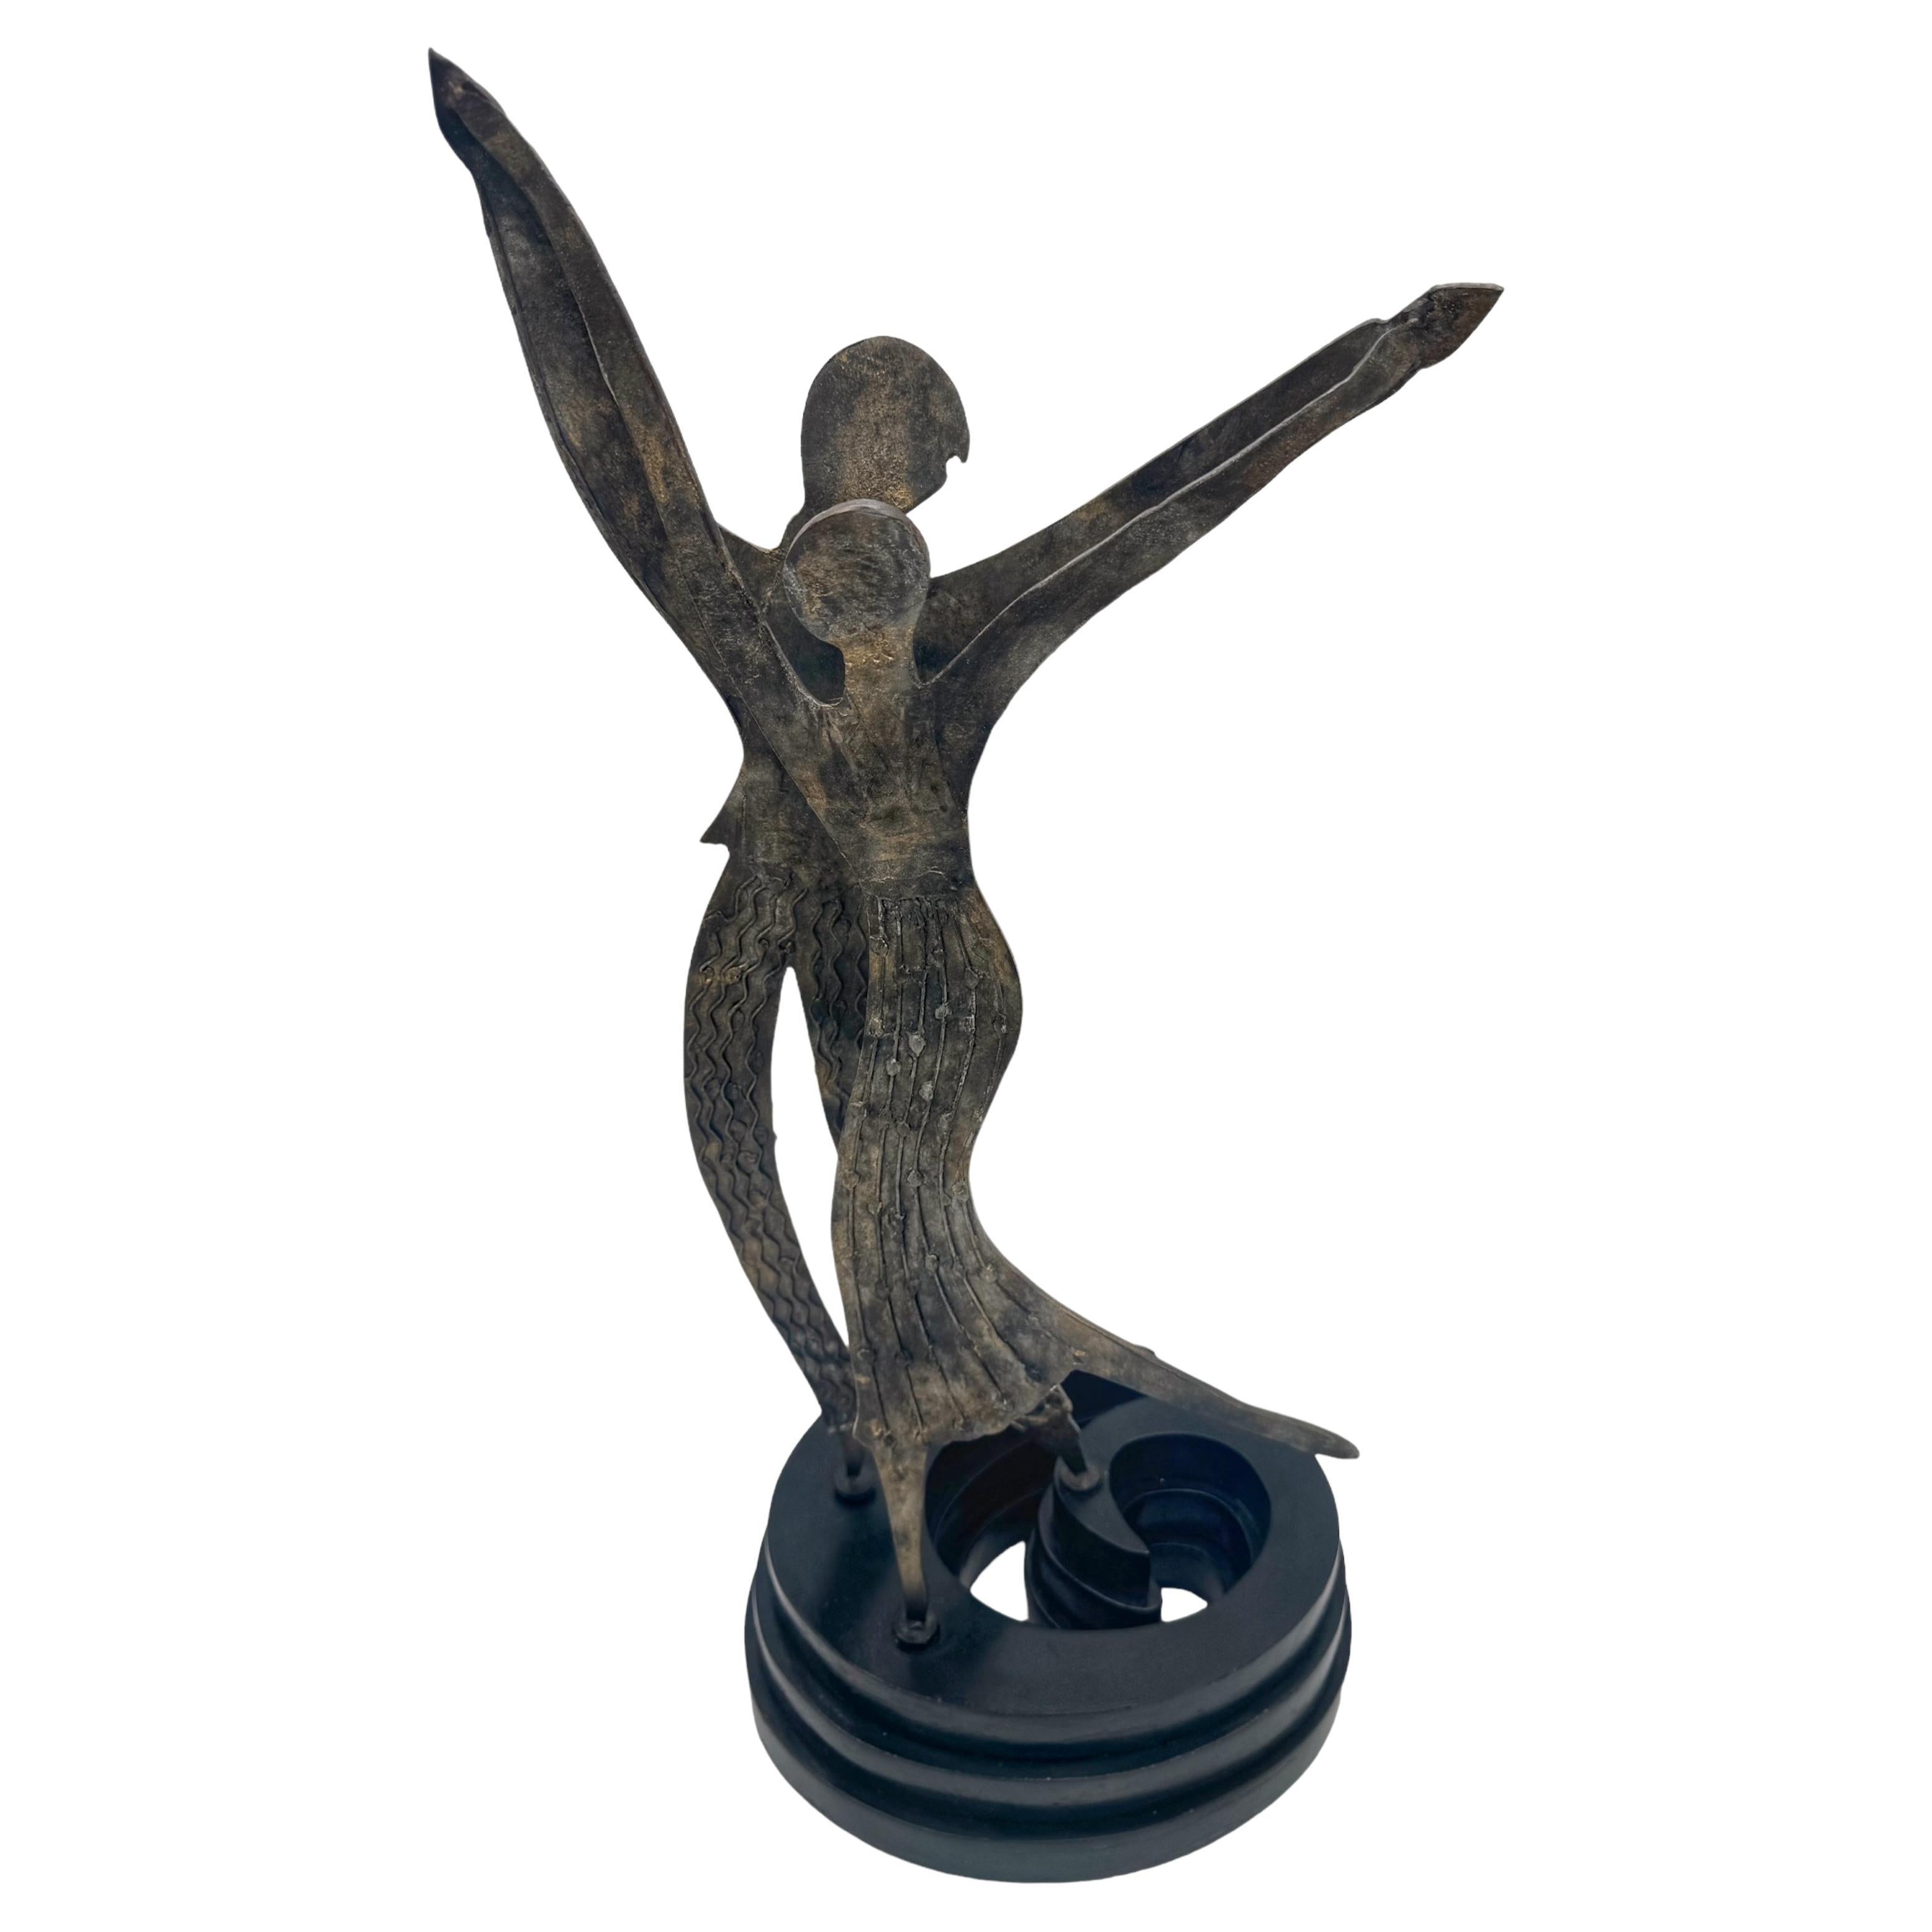 Art Deco / Moderne Hagenauer Style Silvered Dancing Figures, Germany, 1930s